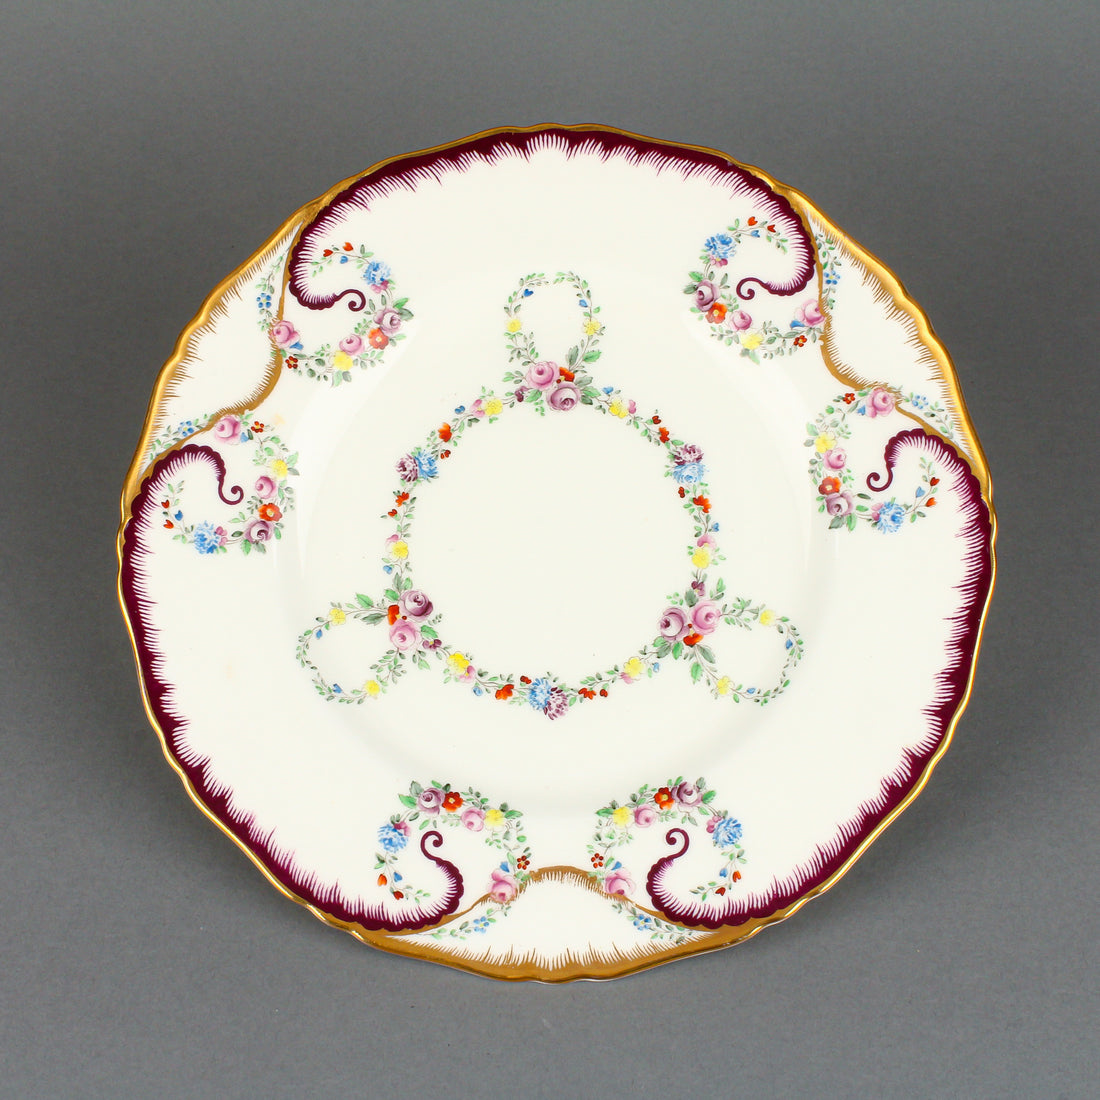 ROYAL WORCESTER Hand-Painted Floral Garland Luncheon Plates - Set of 6